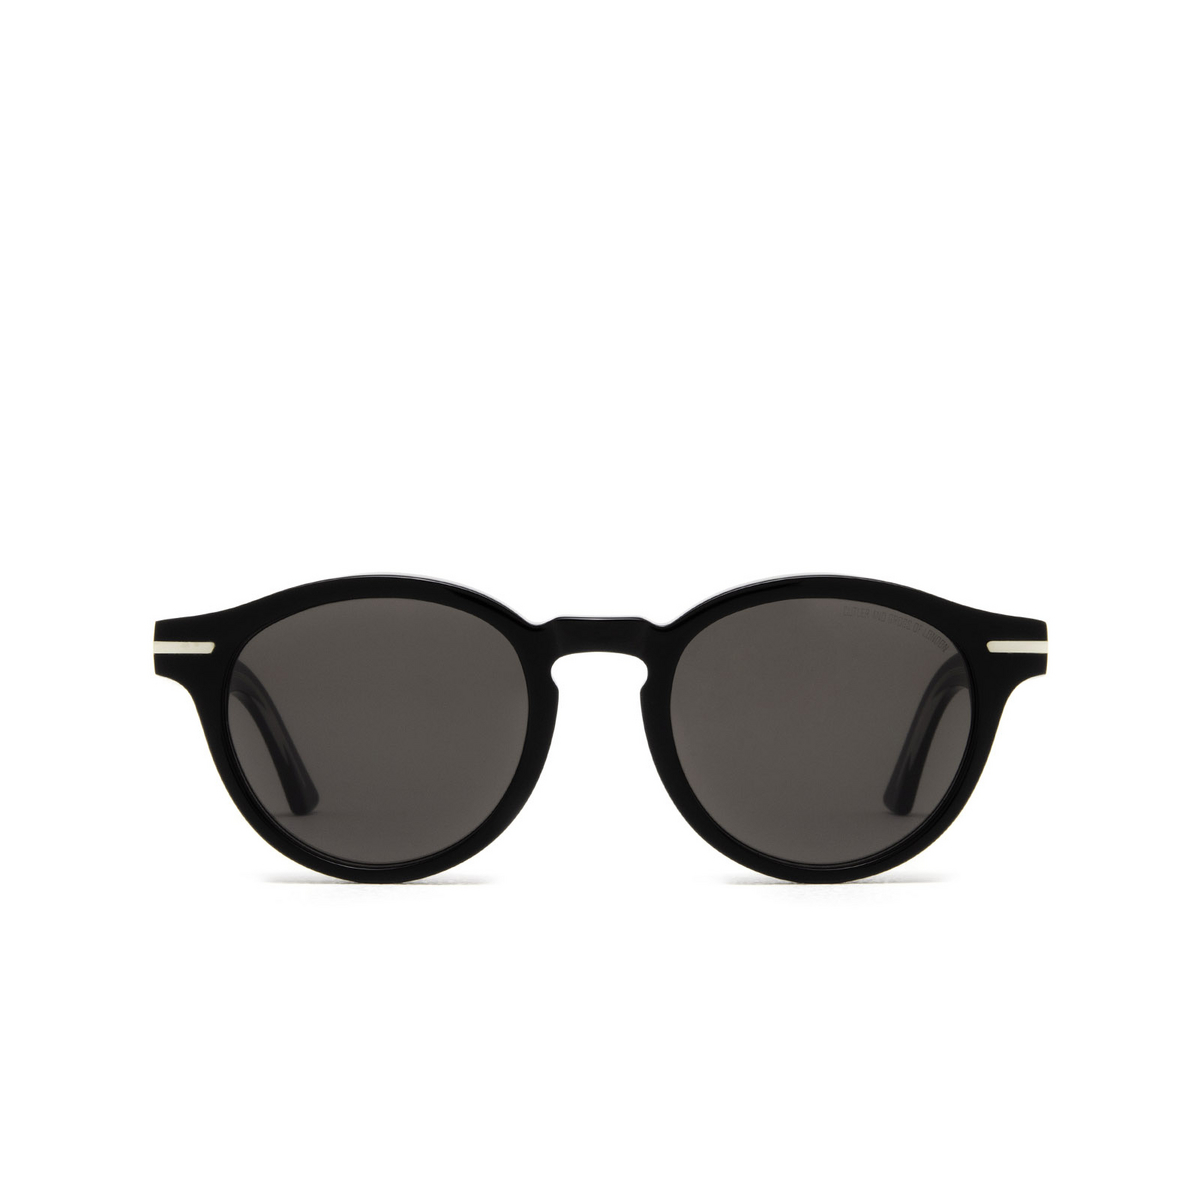 Cutler and Gross® Round Sunglasses: 1338 SUN color Black 01 - front view.